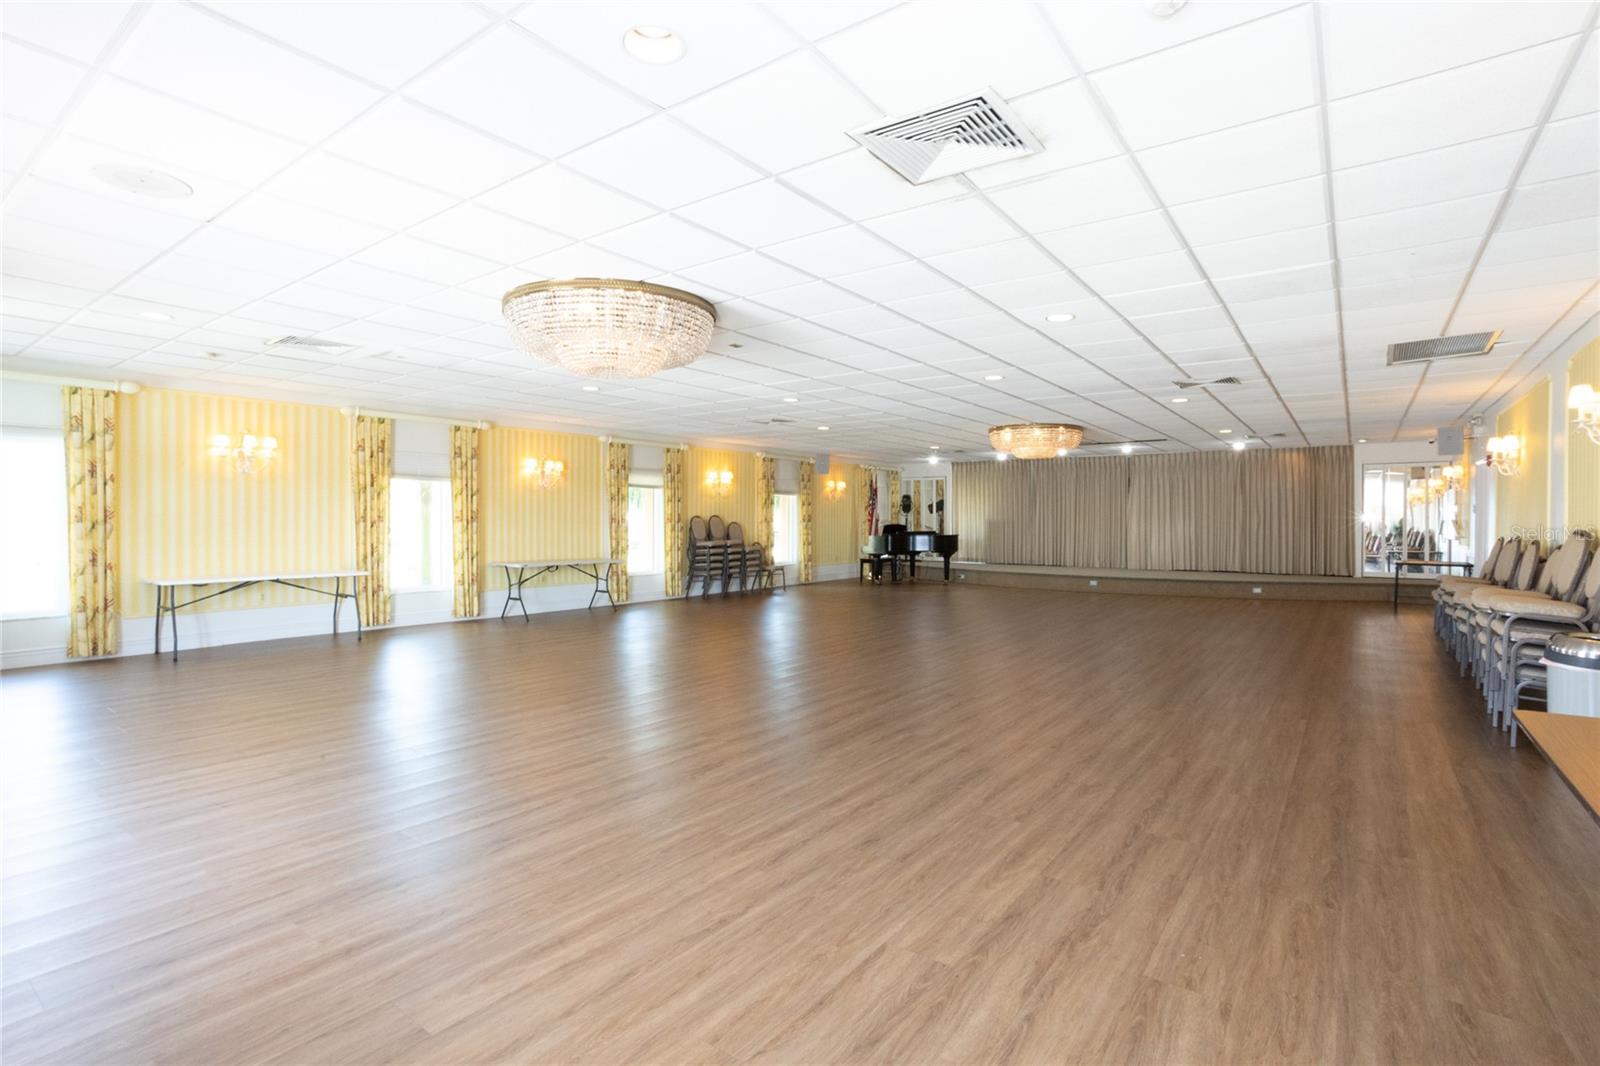 Have a party with all your friends in the ball room.